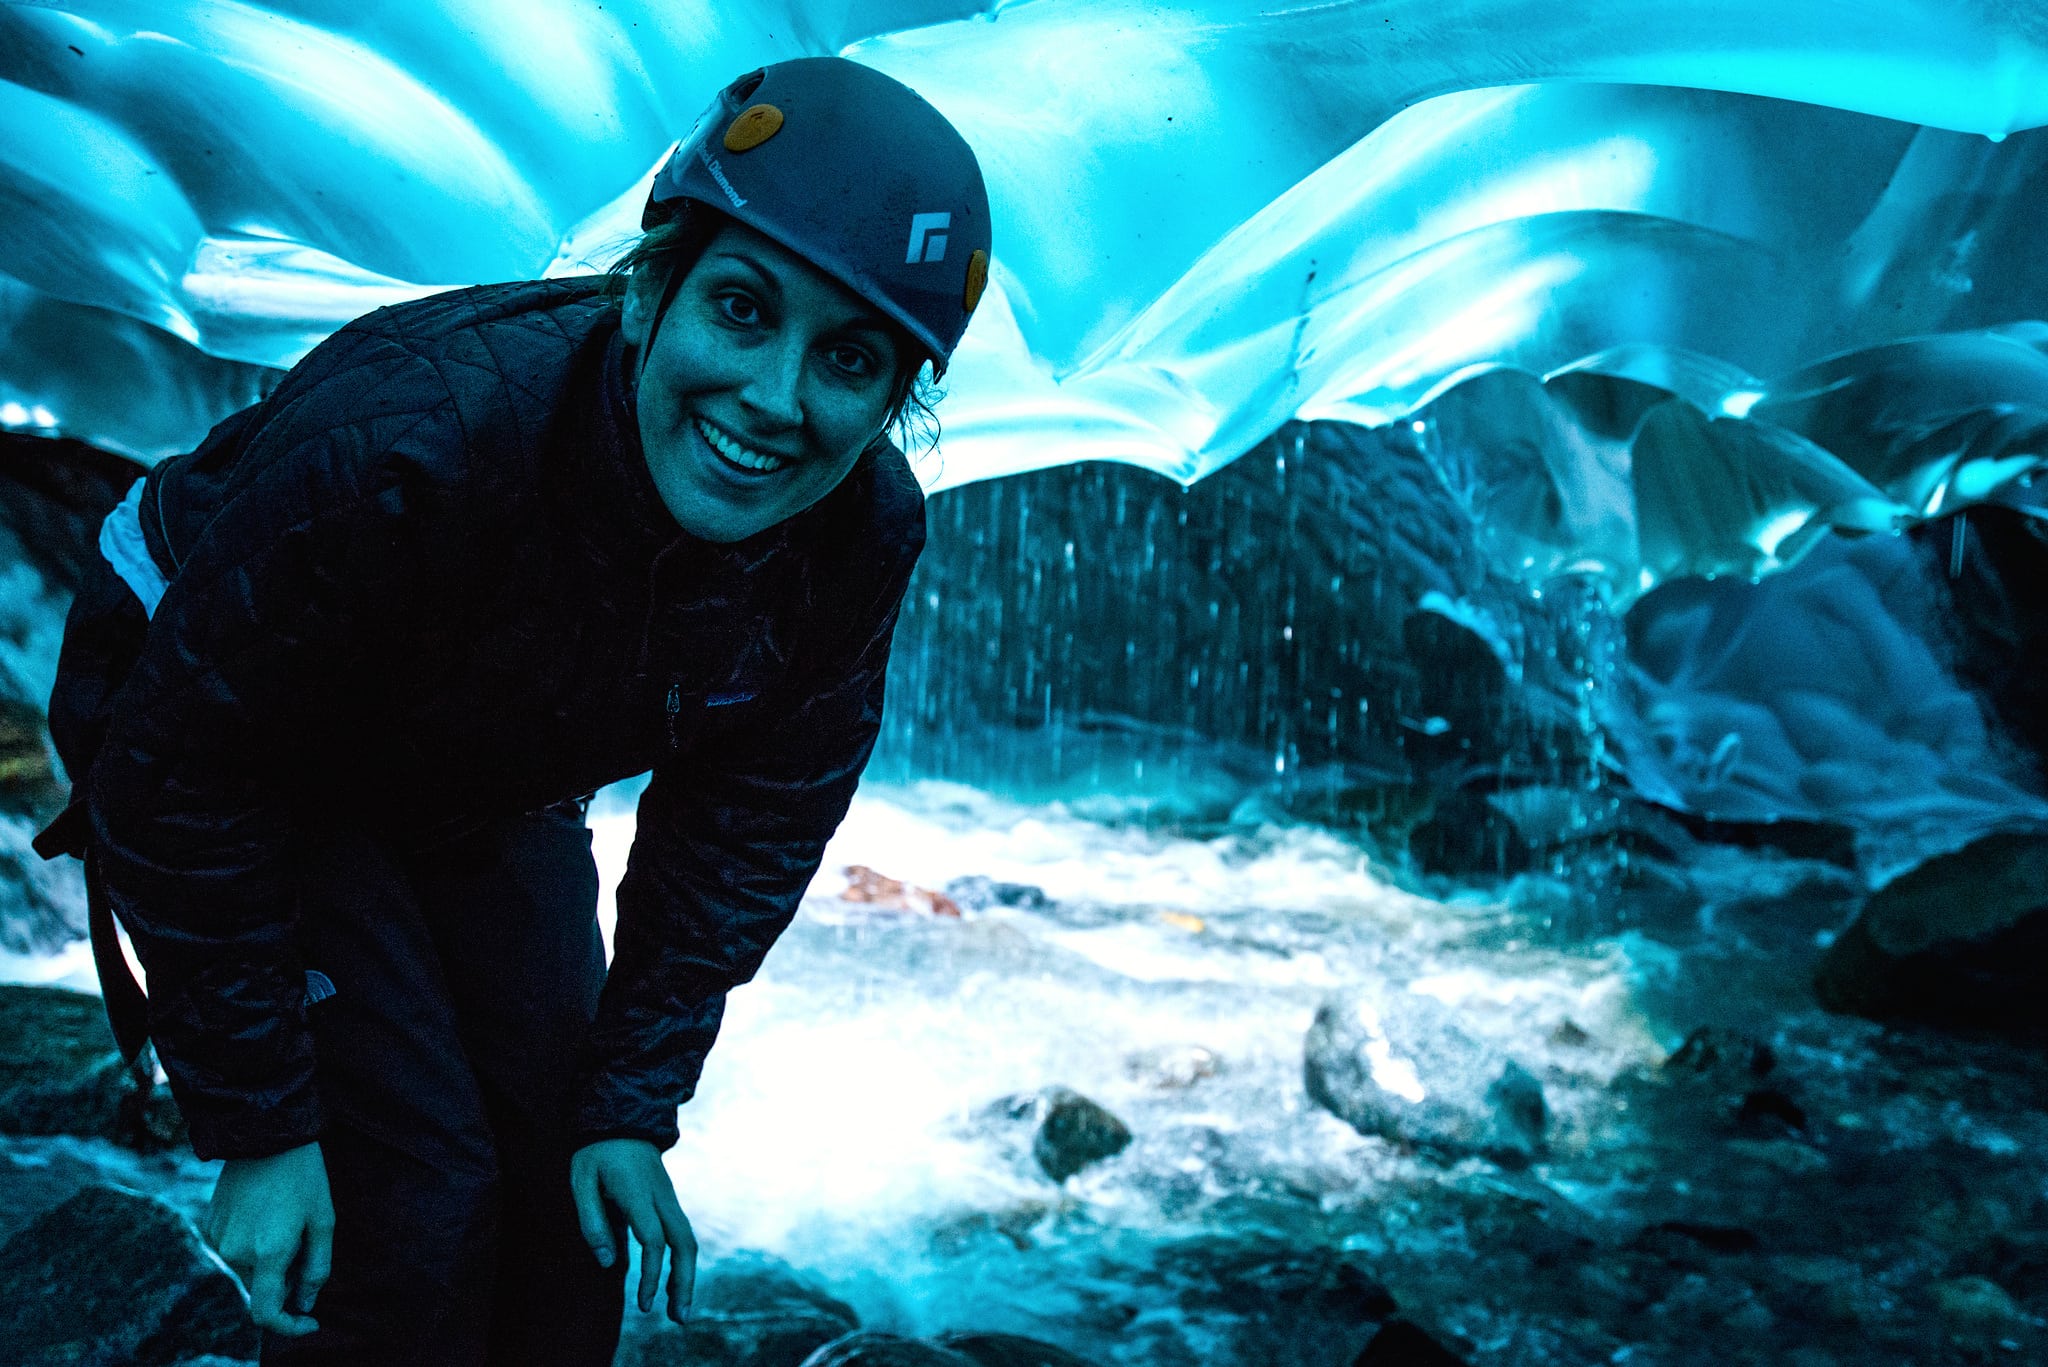 A tourist looks inside a cave in the Mendenhall Glacier in Juneau, Alaska. Andrew Russell / 